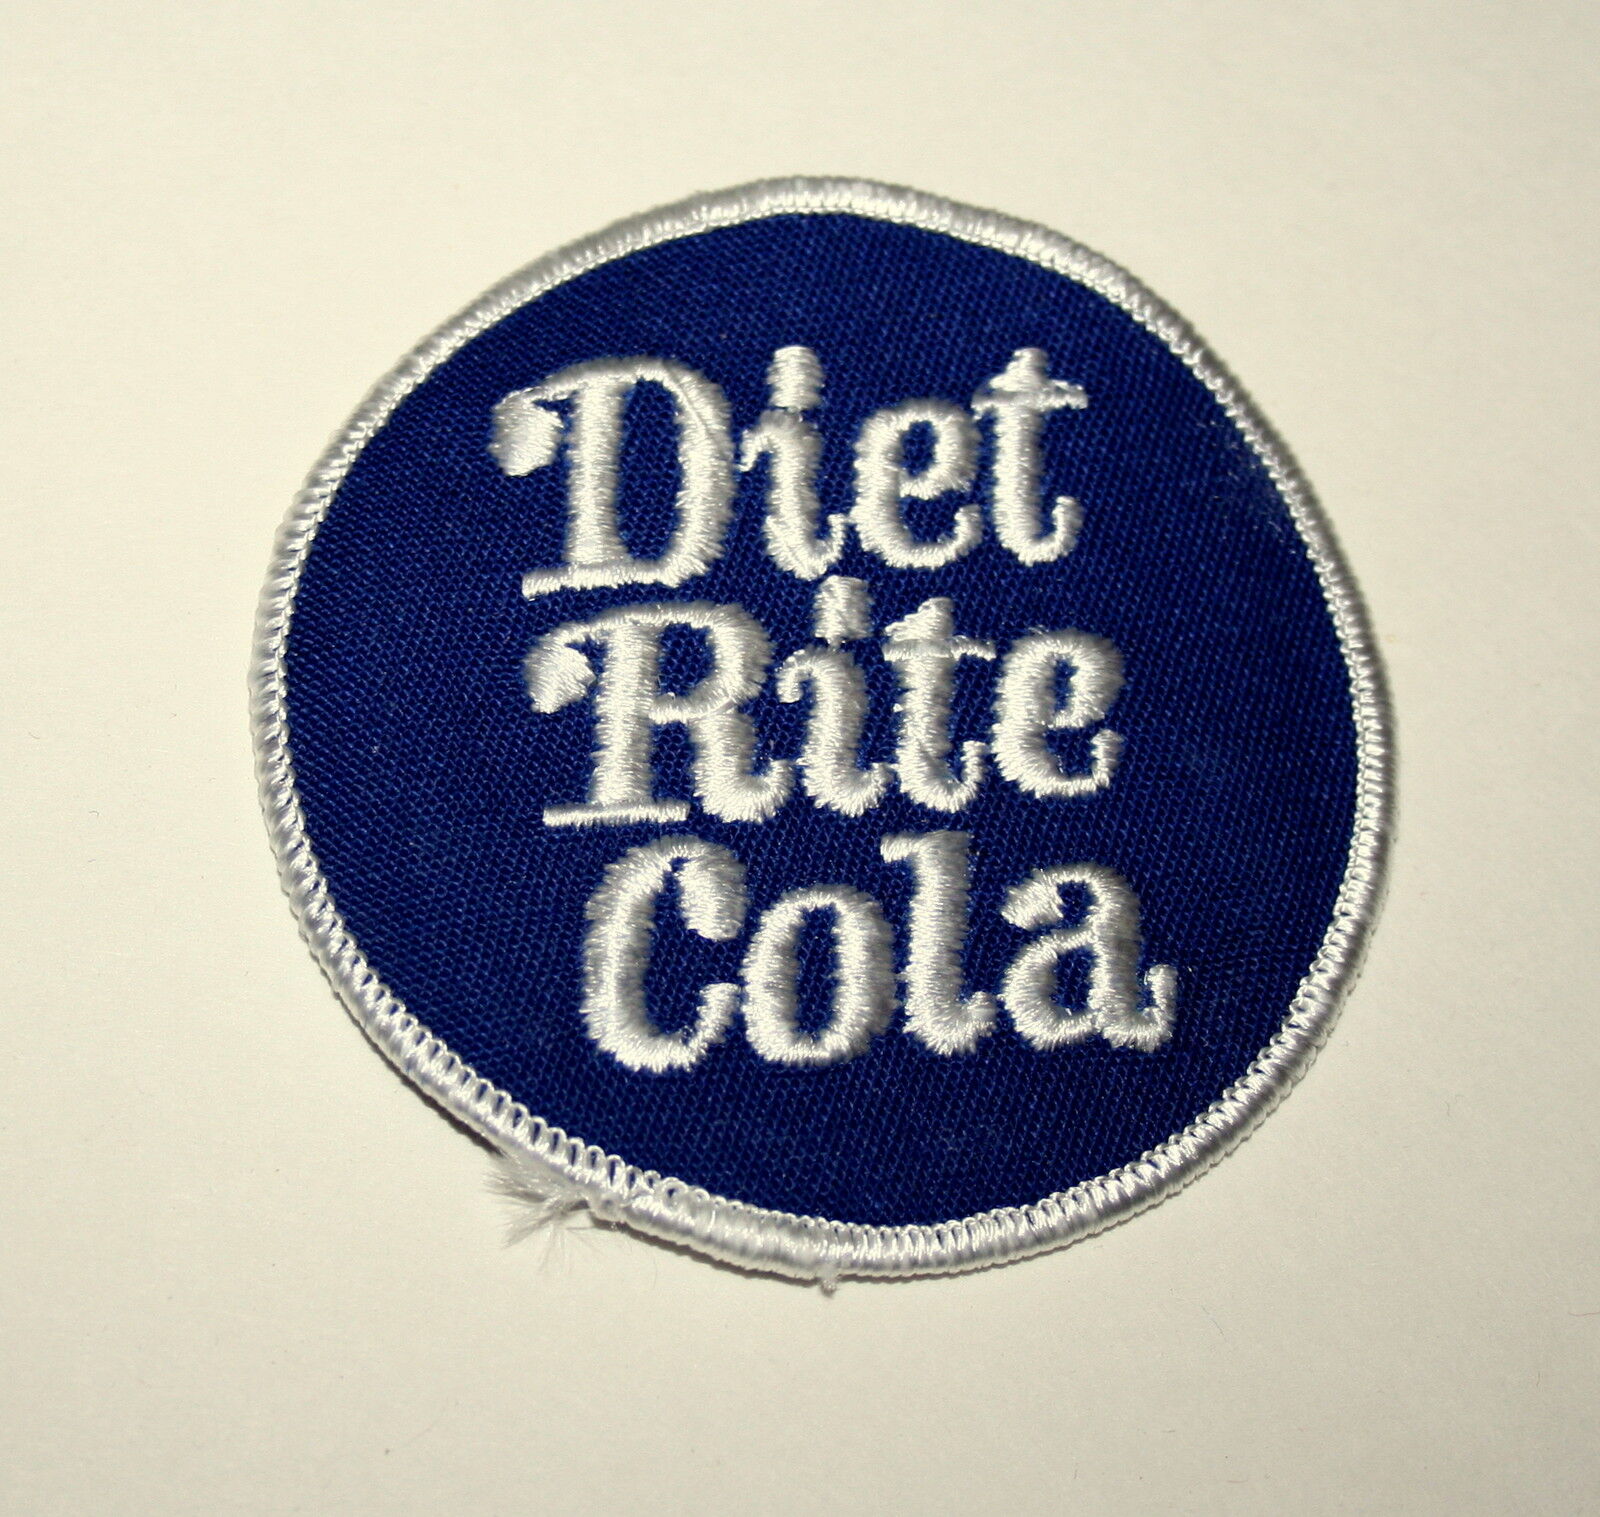 Rare 1960s Diet Rite Cola Soda Employees Cloth Patch New NOS